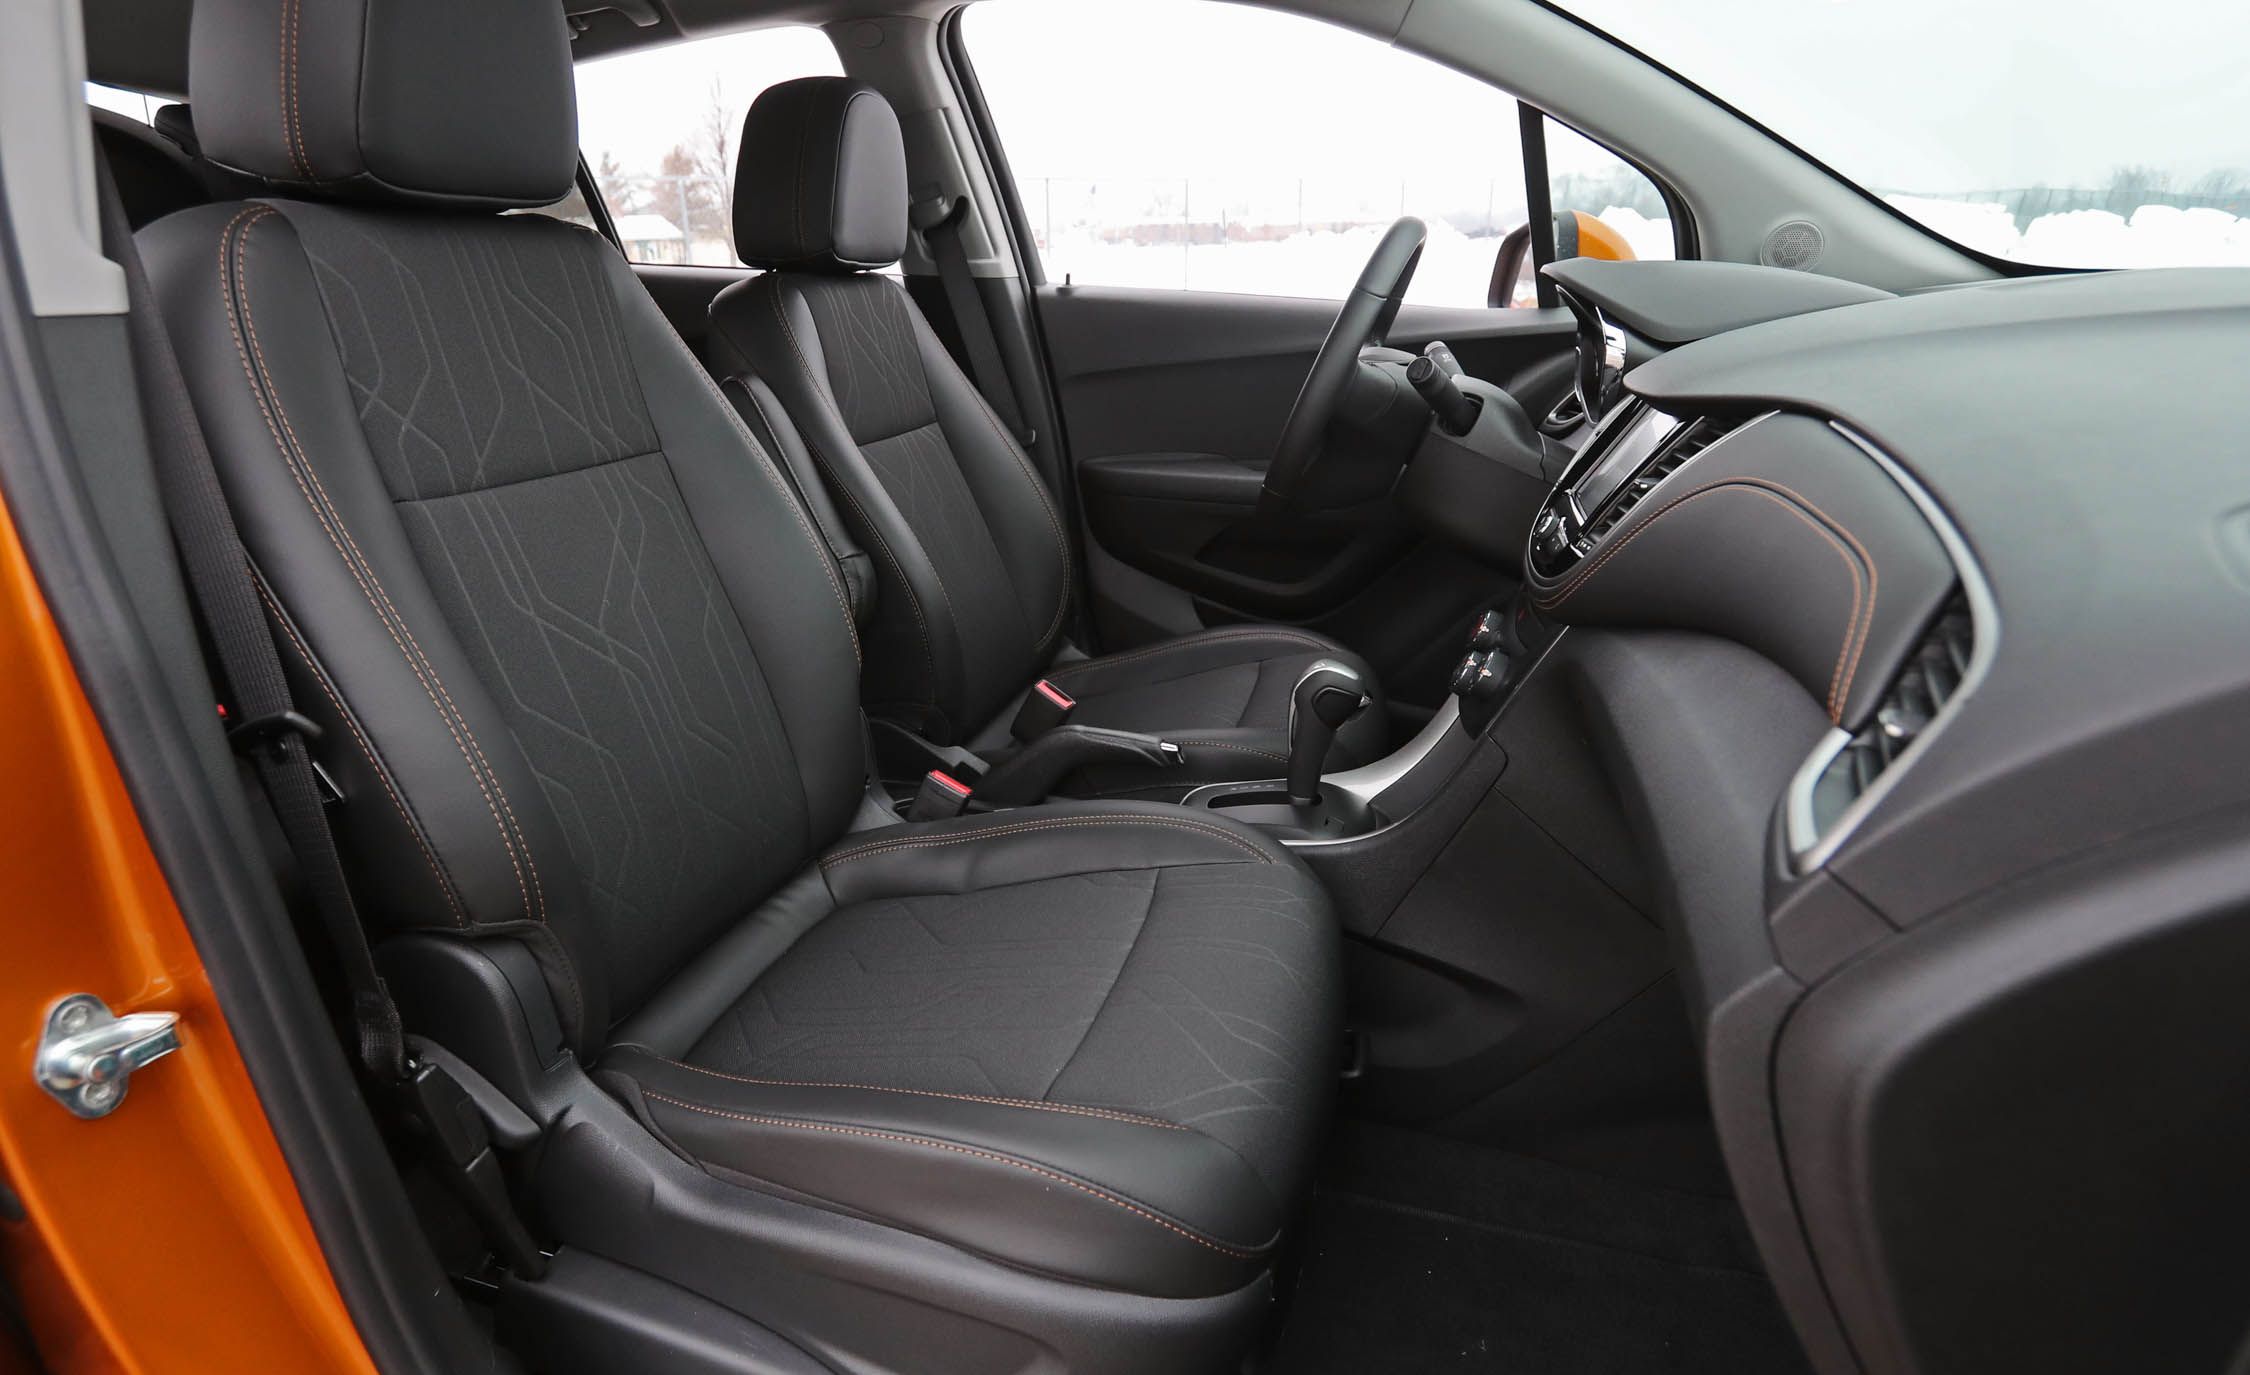 2017 Chevrolet Trax Interior Seats Front (View 30 of 47)